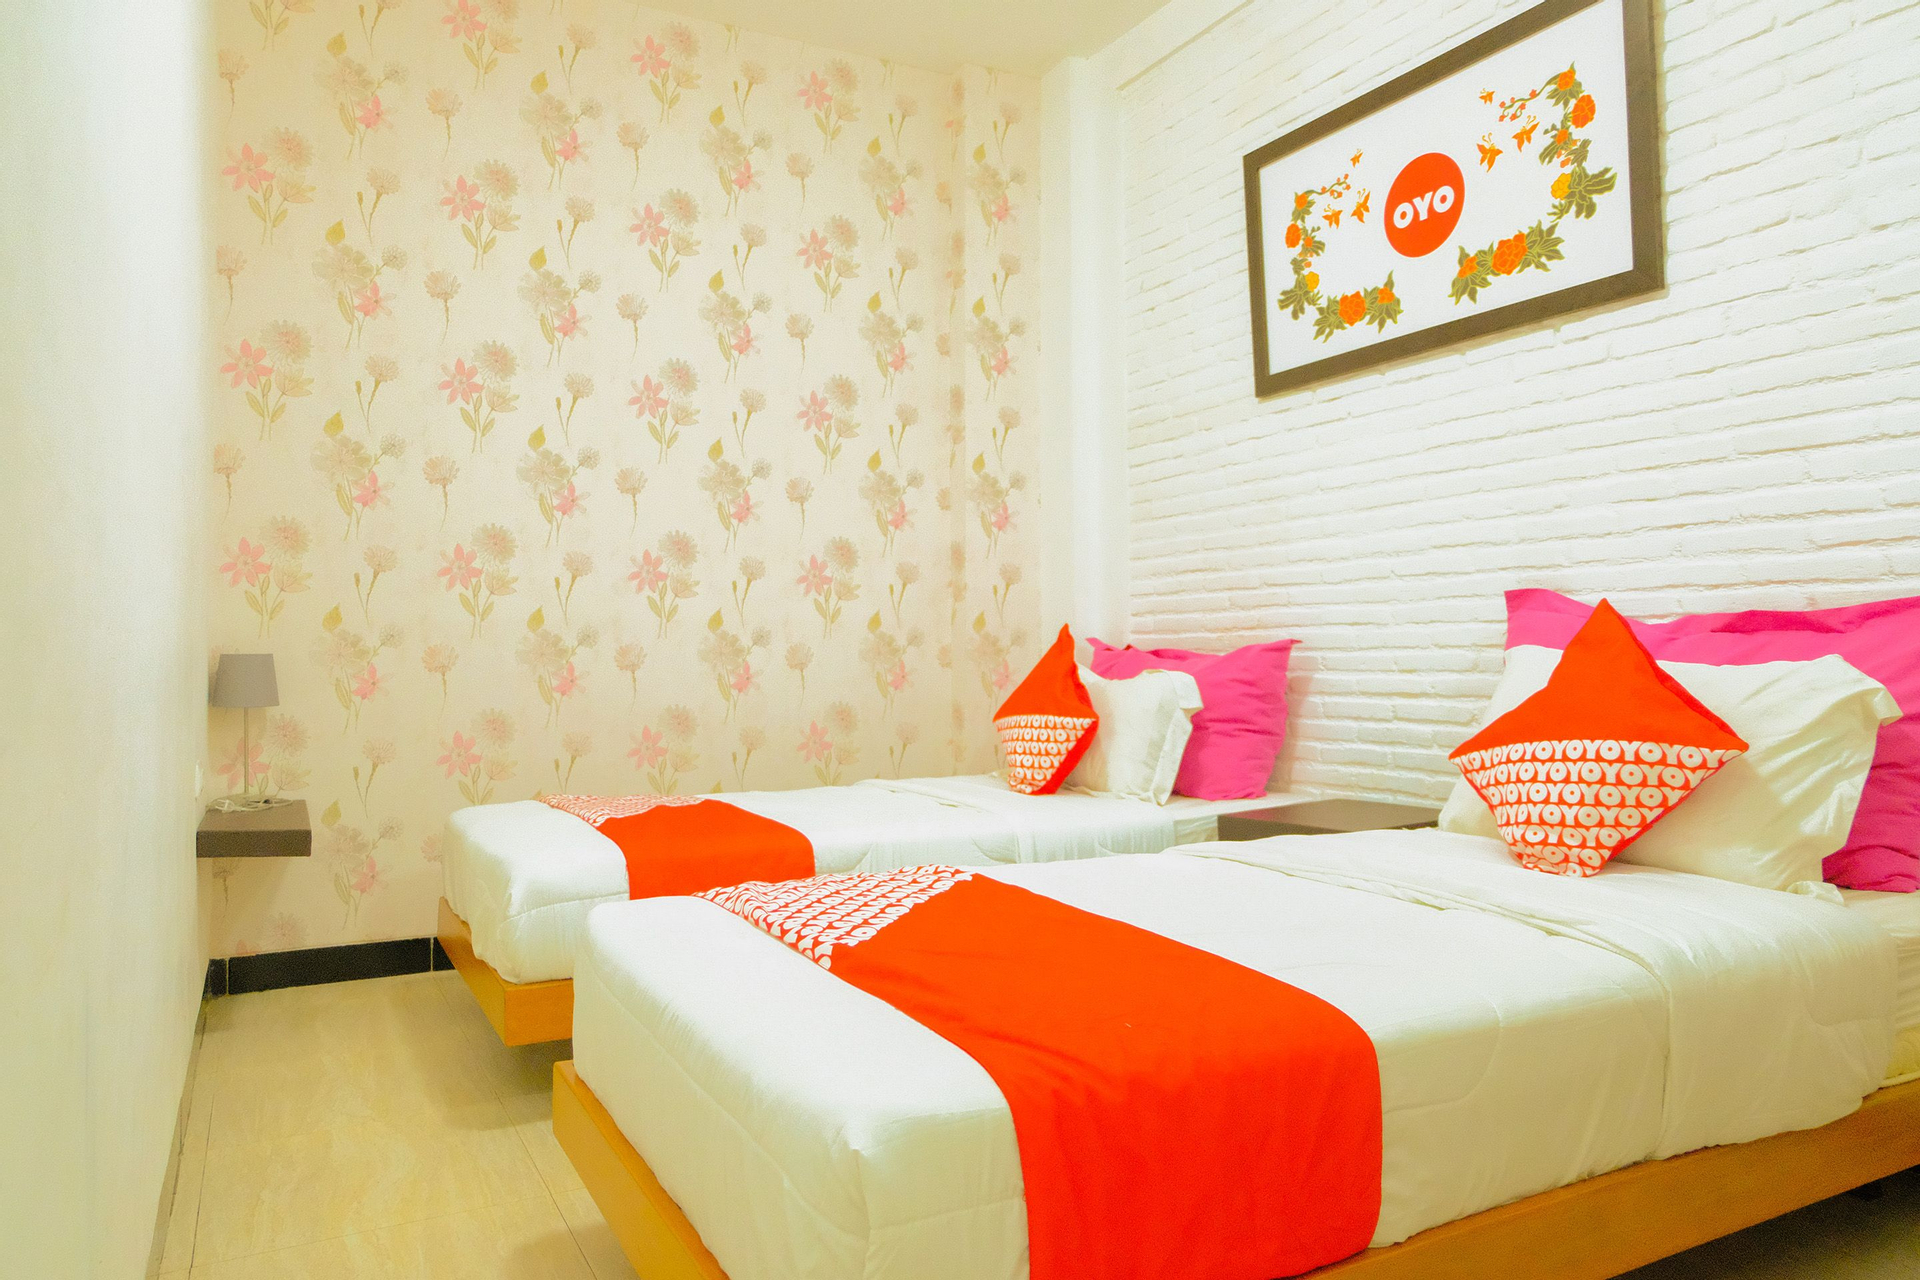 Bedroom 3, OYO 354 32 Guest House, Malang